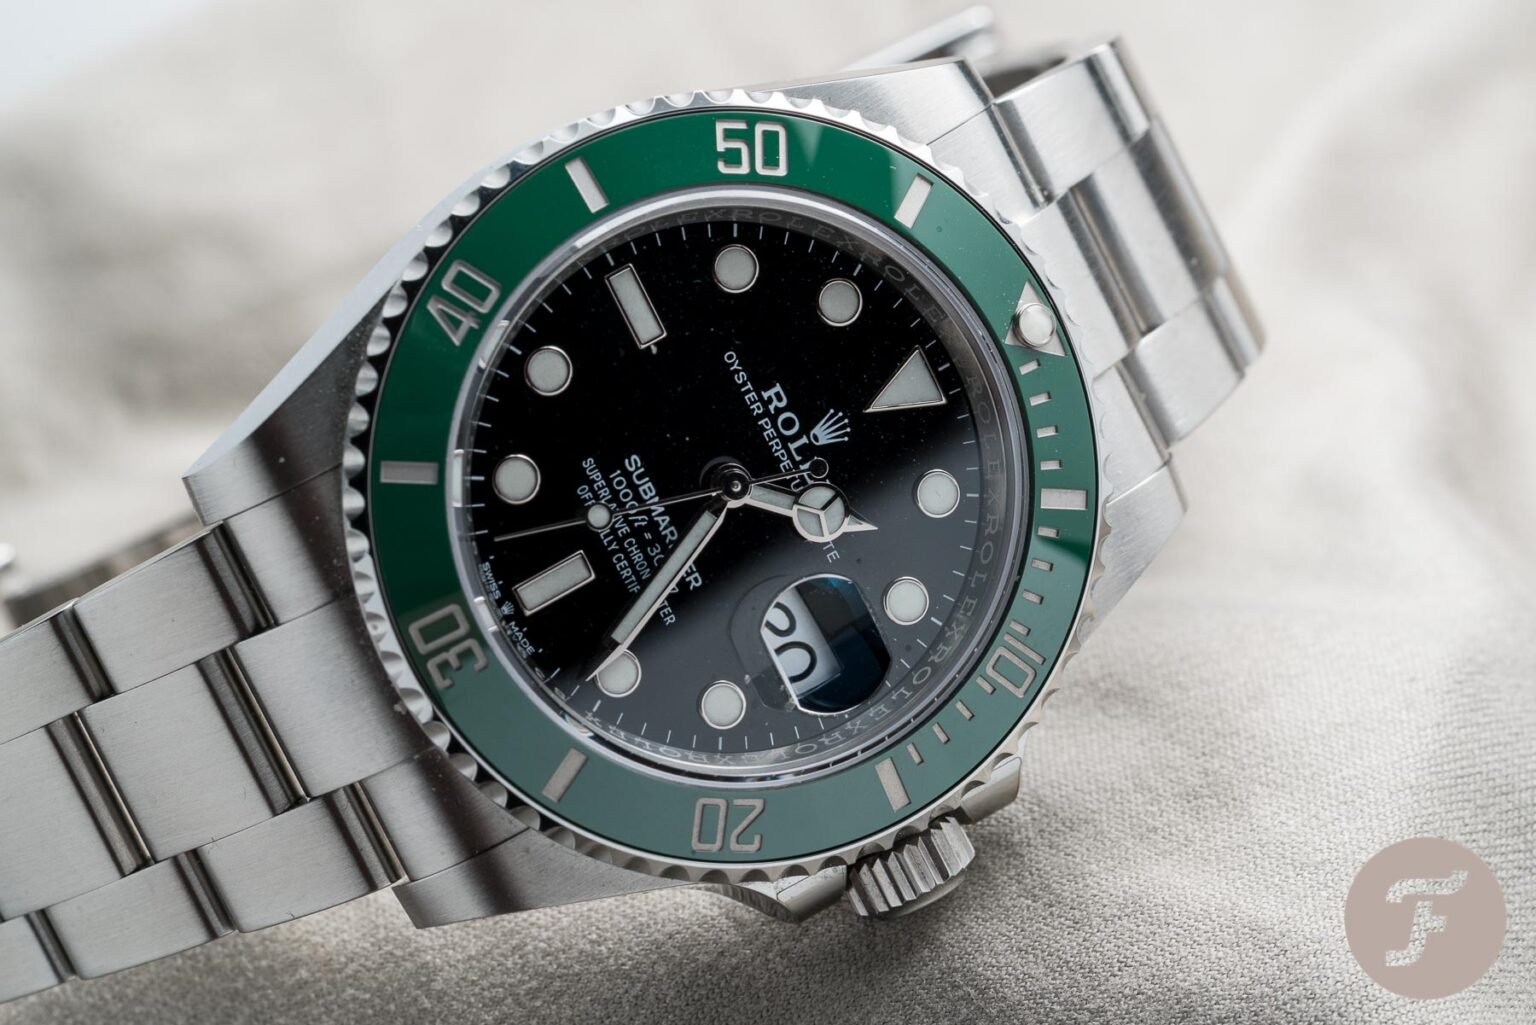 Top 10 Rolex Watches - Overview of Models Favoured By Our Readers